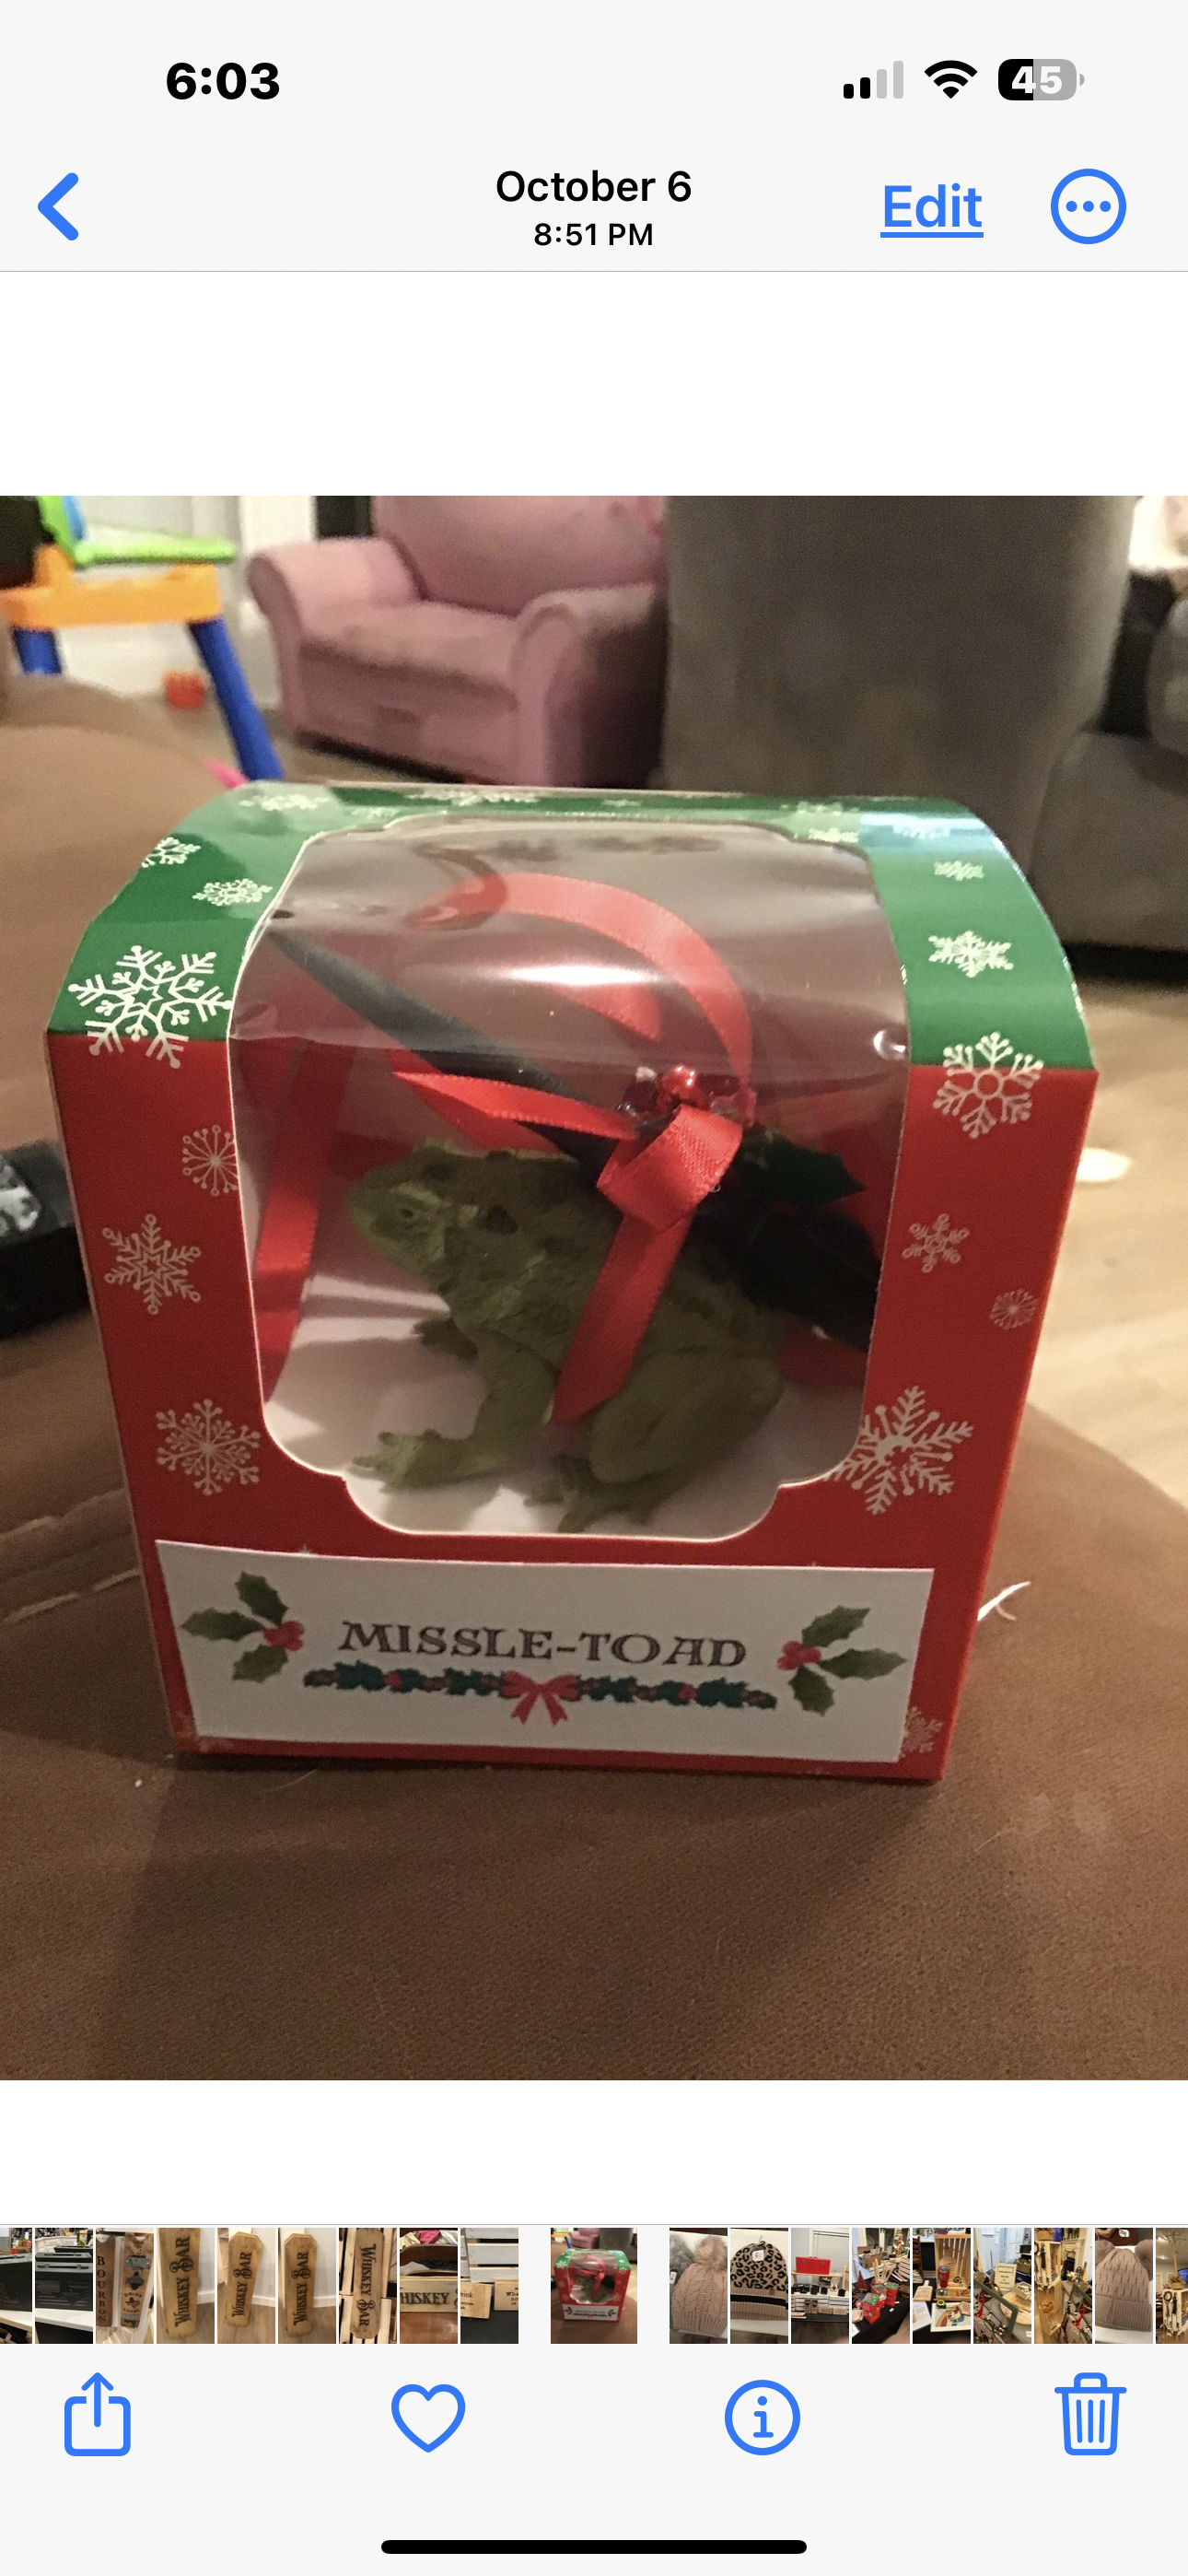 Missile-Toad this Christmas